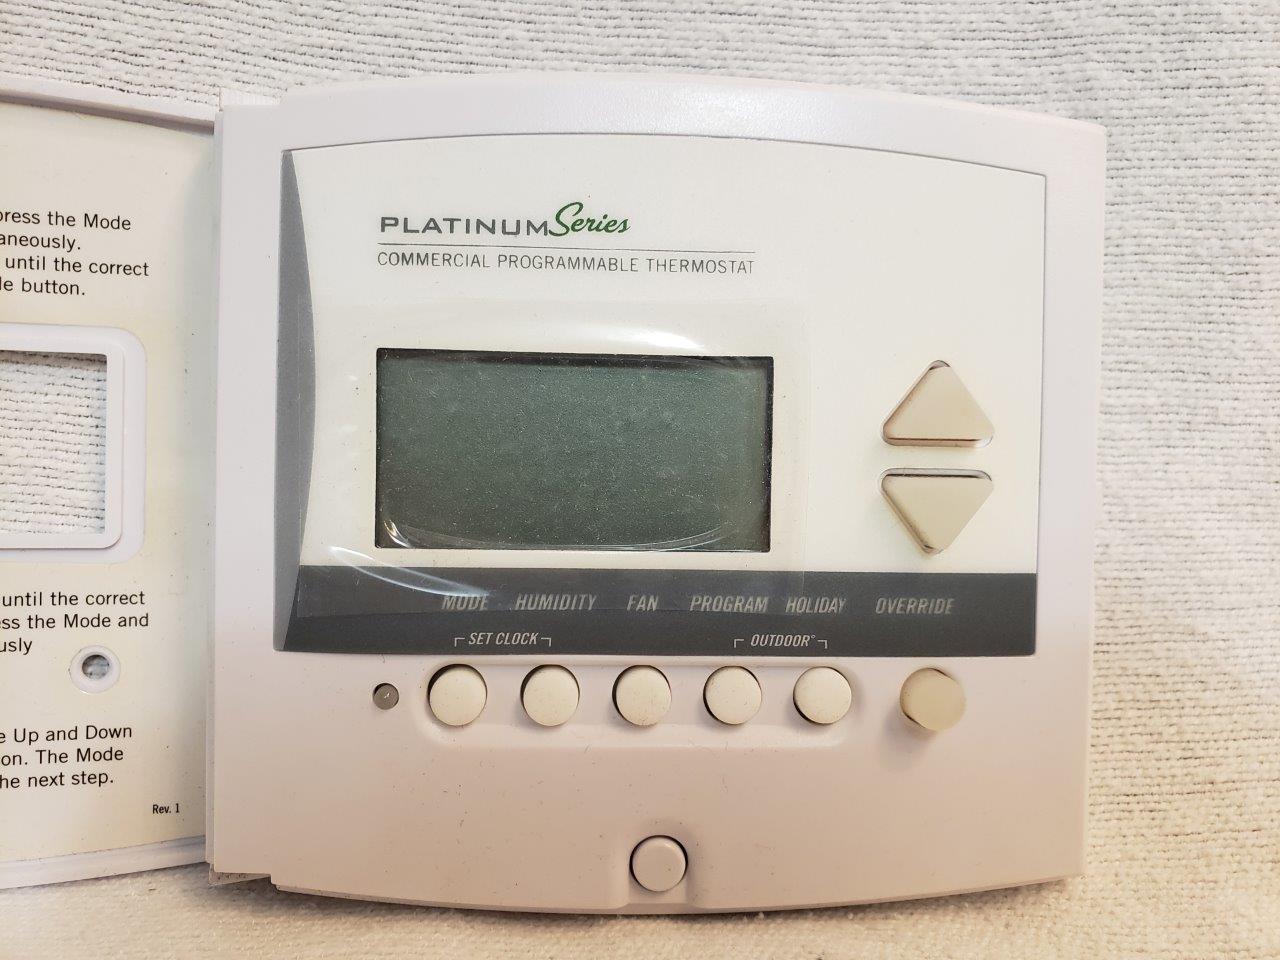 Venstar T2800 Commercial Platinum Slimline Thermostat (3 Heat, 2 Cool) New Wi-Fi Programmable